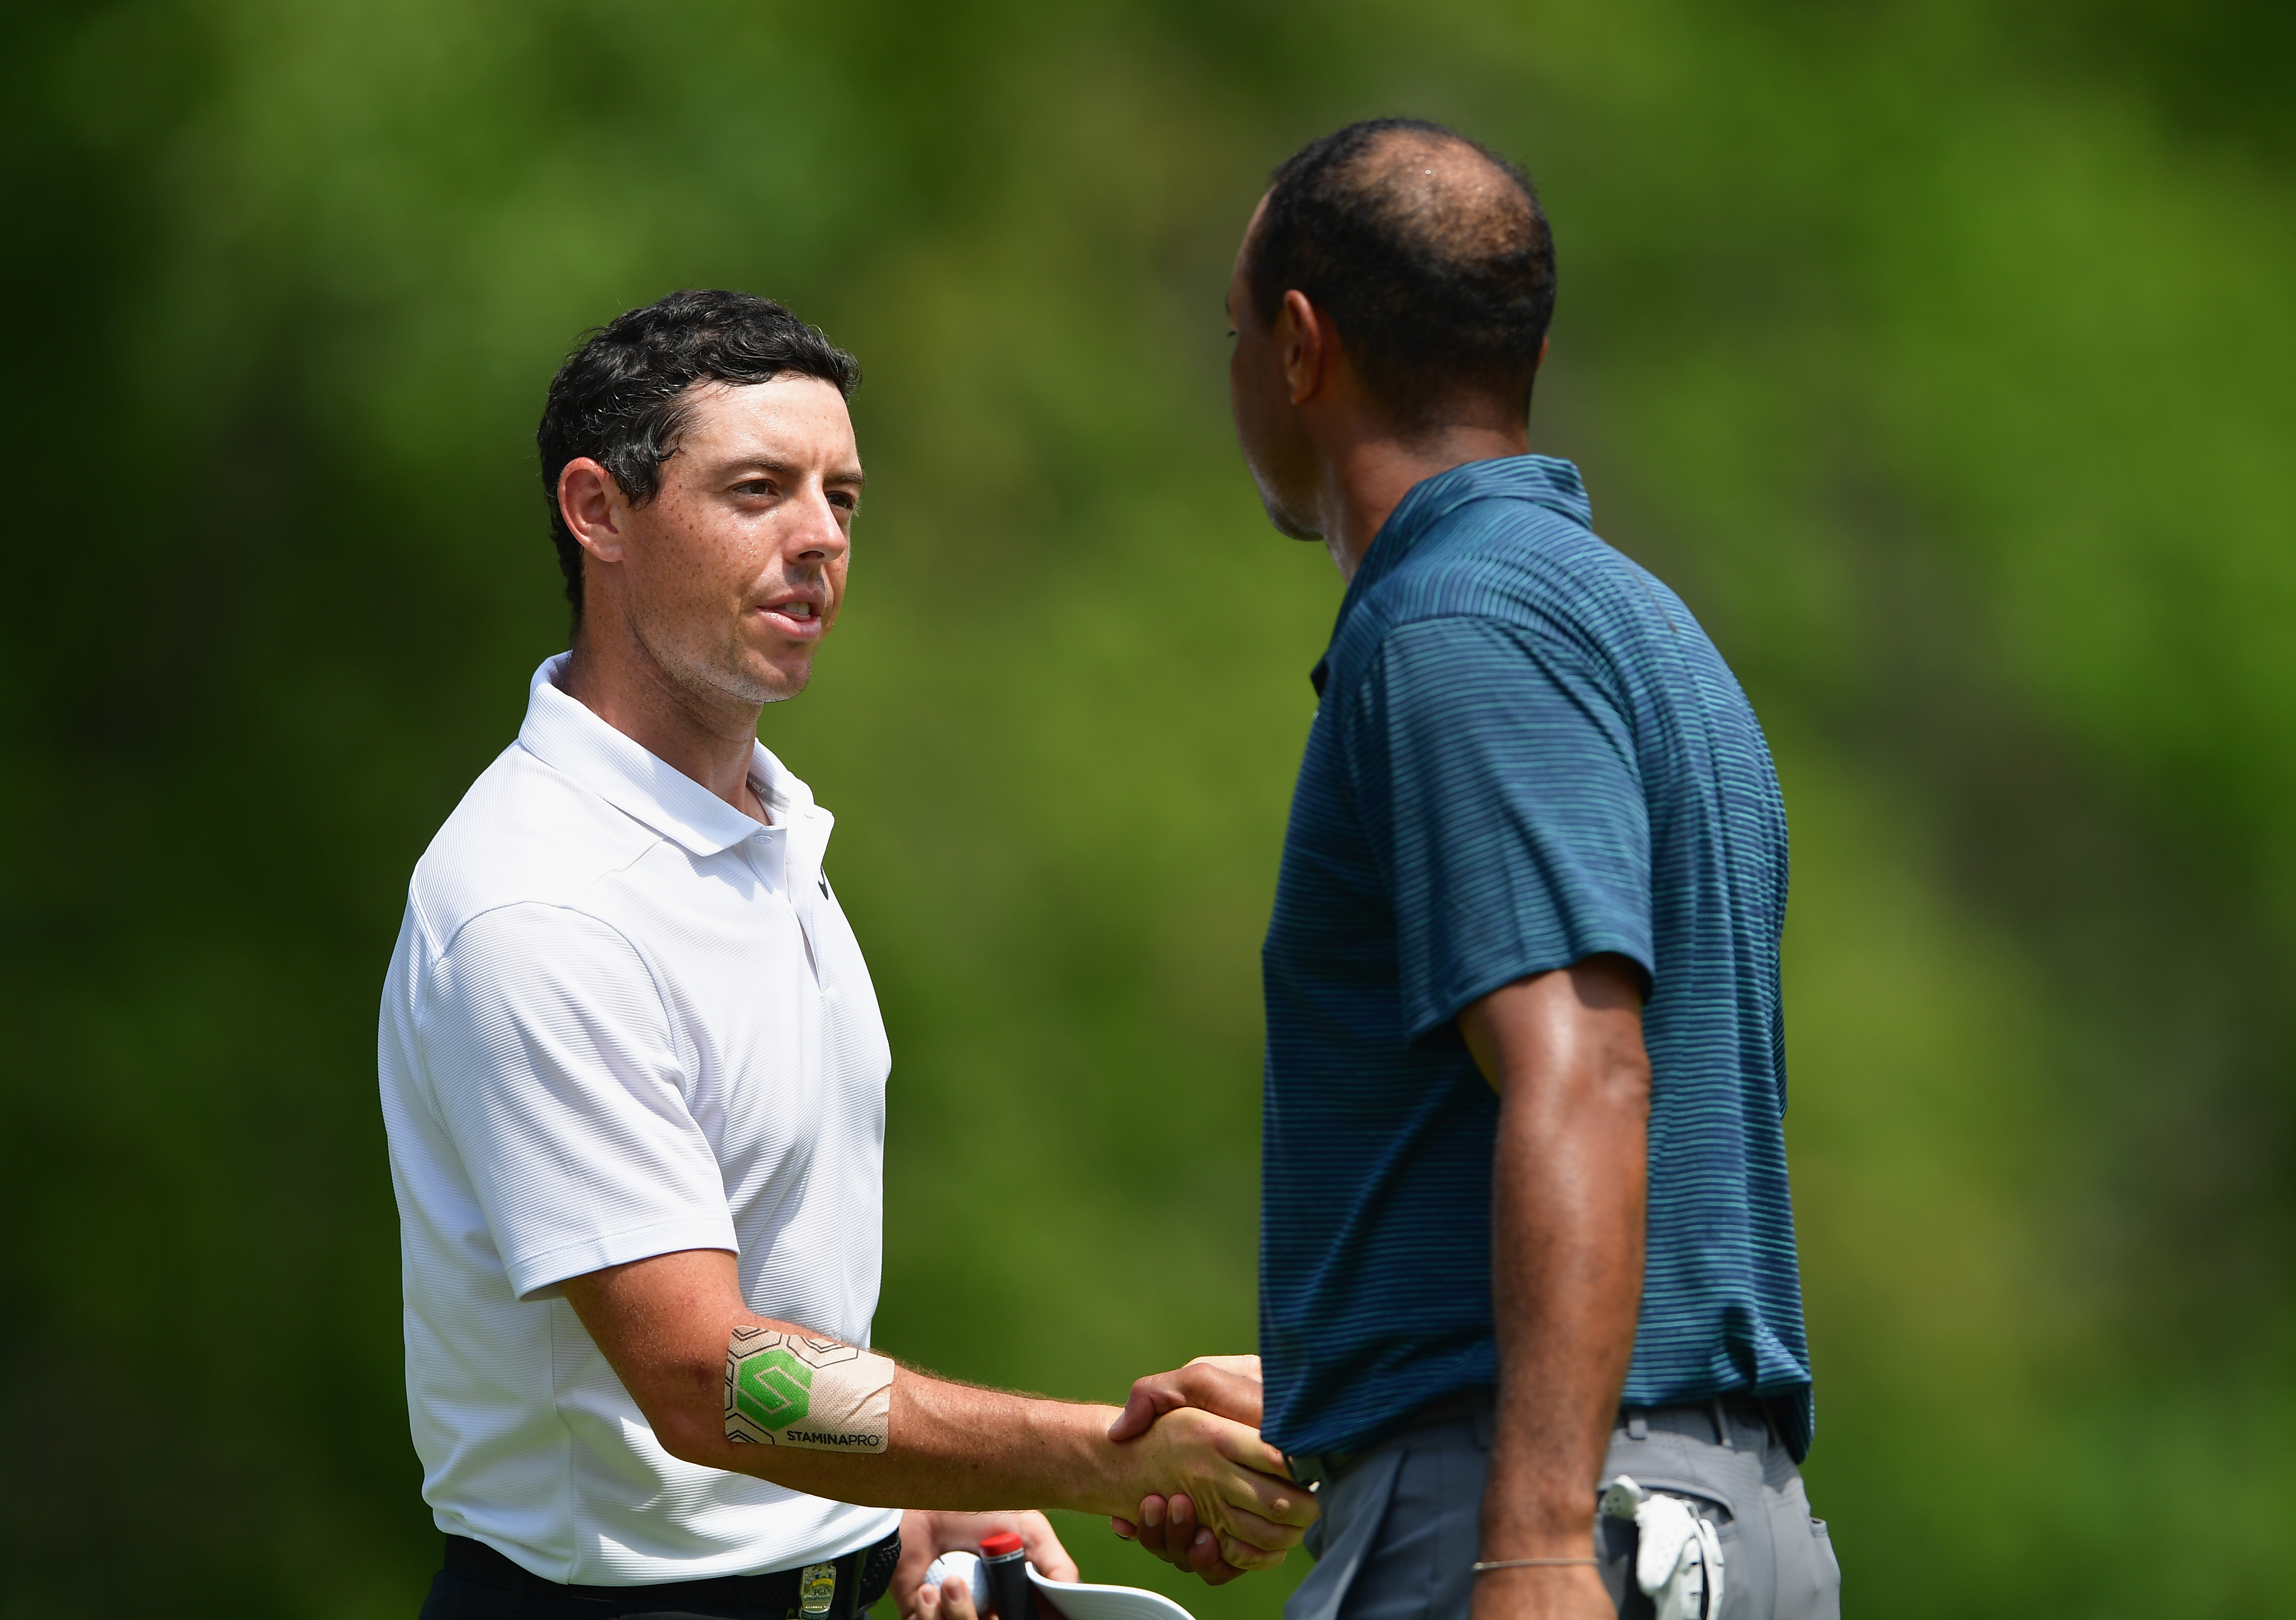 The real reason why Rory McIlroy has a patch on his forearm at US PGA